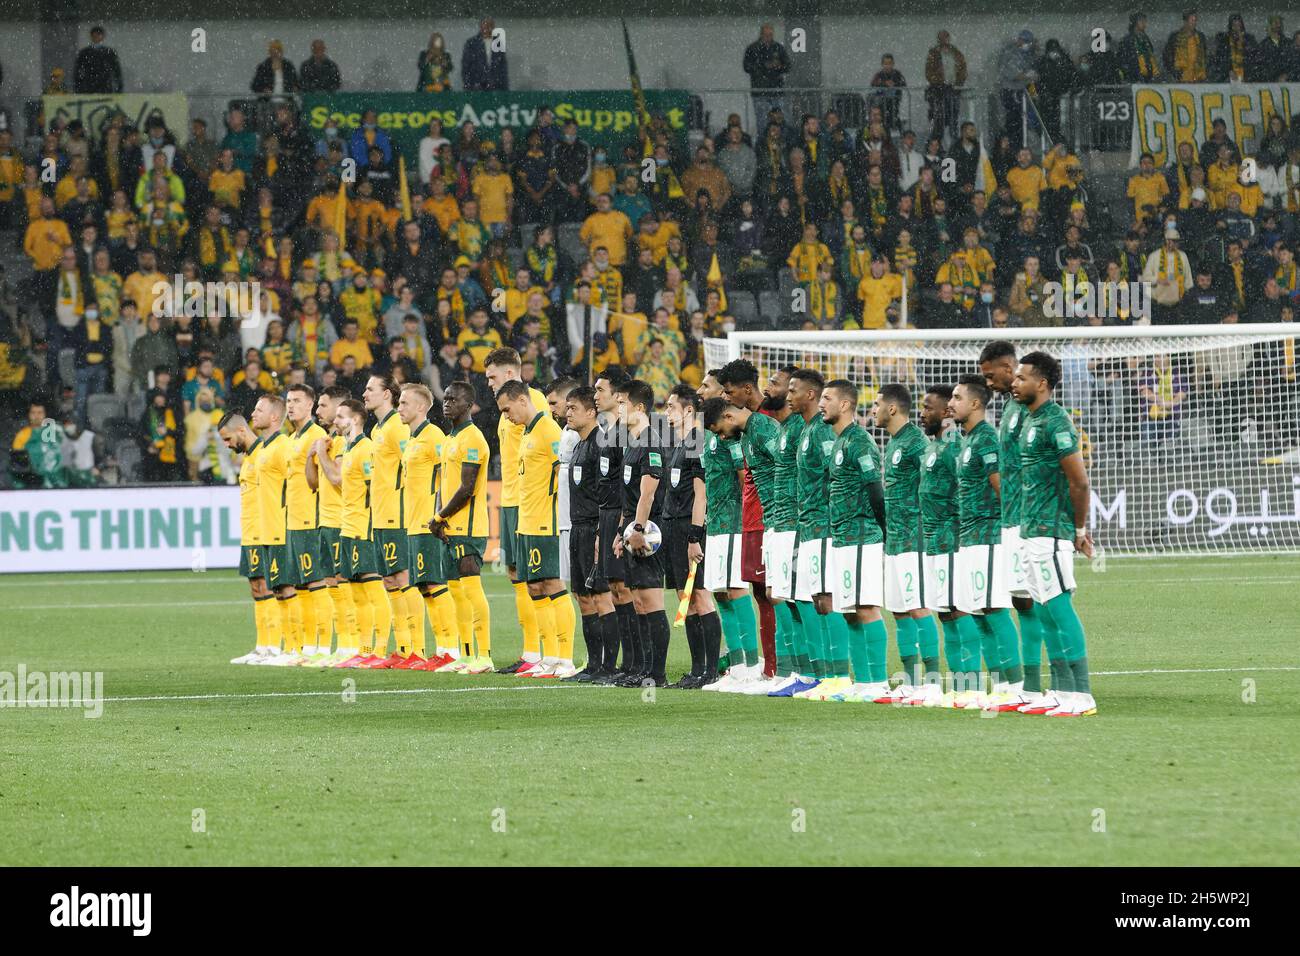 Sydney, Australia. 11th Nov, 2021. Both teams wait to sing the national anthem during the FIFA World Cup AFC Asian Qualifier match between the Australia Socceroos and Saudi Arabia at CommBank Stadium on November 11, 2021 in Sydney, Australia Credit: IOIO IMAGES/Alamy Live News Stock Photo